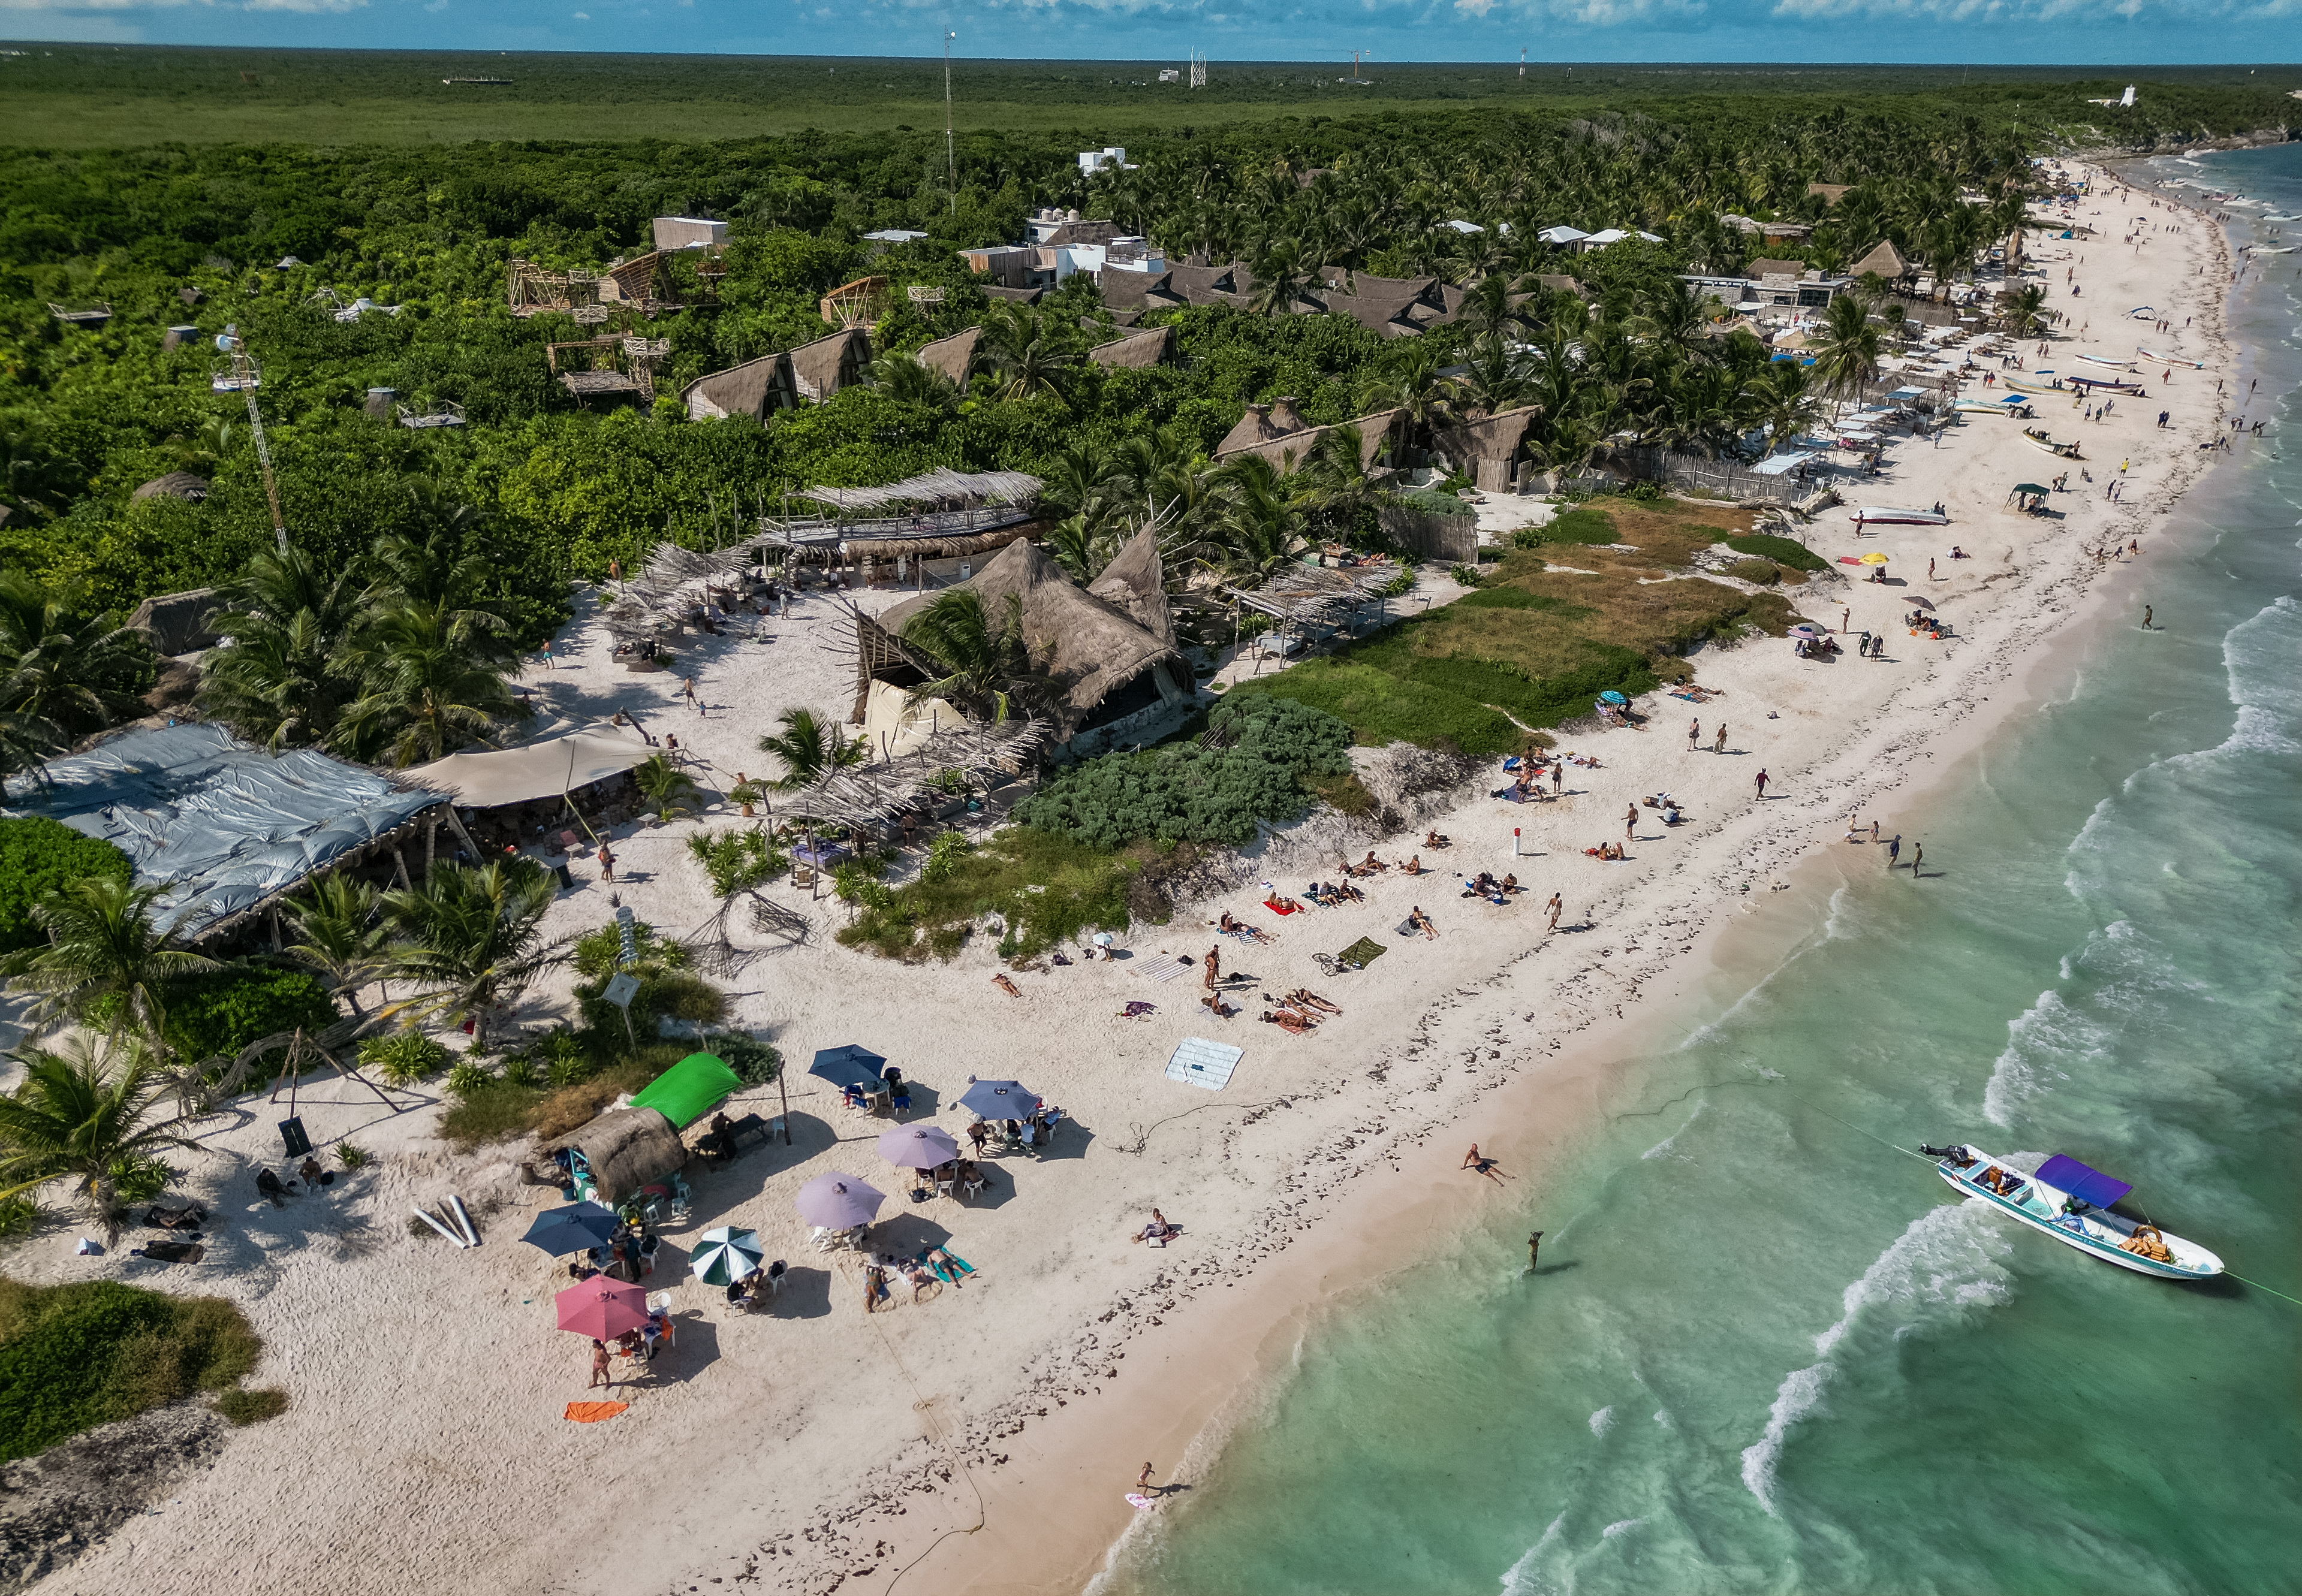 Drone shot of the IKAL beach club in Tulum on a sunny day.